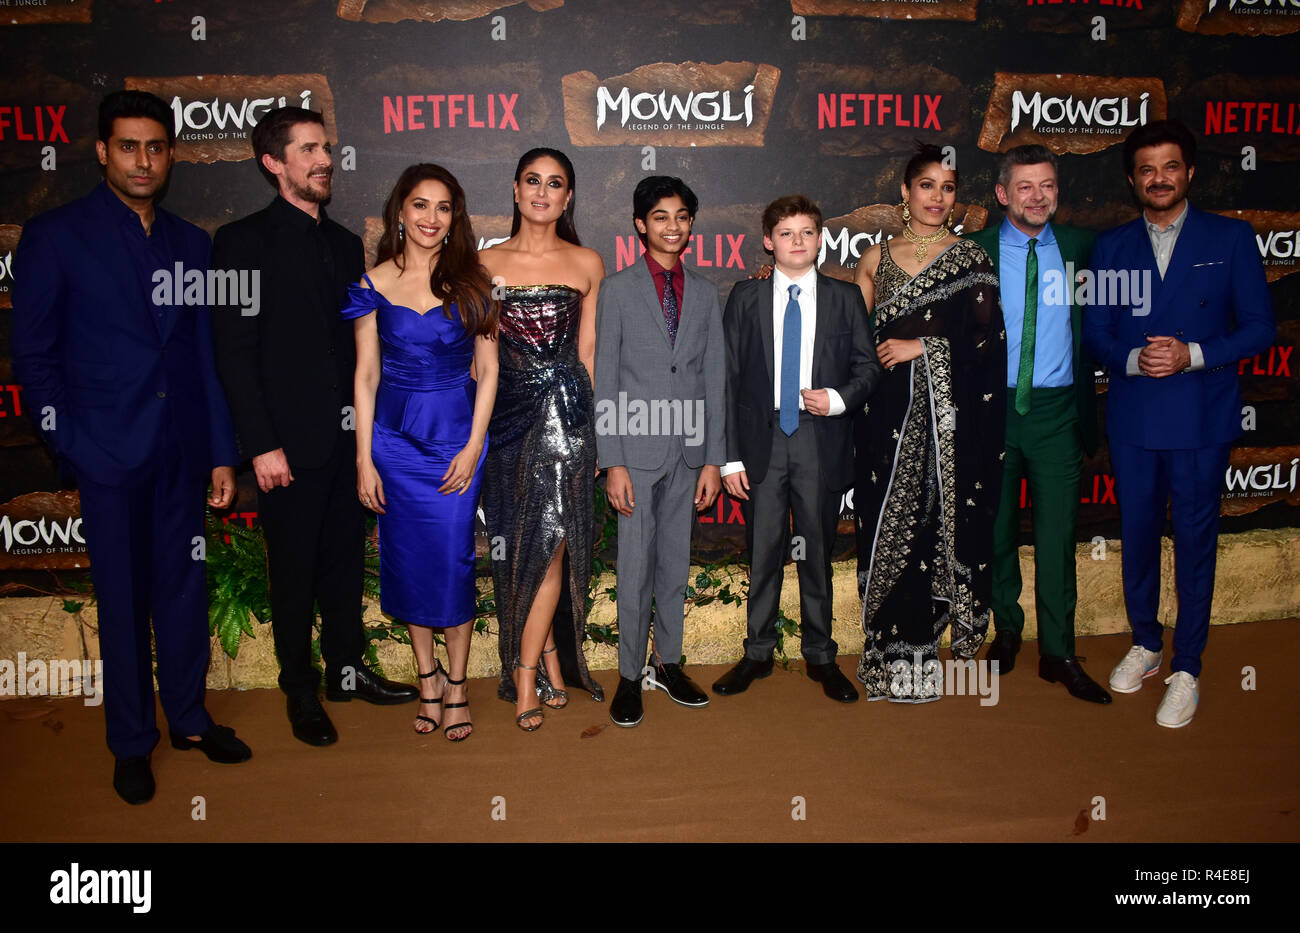 L-R: Actors Abhishek Bachchan, Christian Bale, Madhuri Dixit, Kareena Kapoor,  Rohan Chand, Louis Serkis, Freida Pinto, Andy Serkis and Anil Kapoor are seen on the red carpet during the world premier of Netflix's 'Mowgli; Legend Of The Jungle at the YRF Studio in Mumbai. Netflix's 'Mowgli, Legend of the Jungle' was slated to be released on 7th December, 2018. Stock Photo